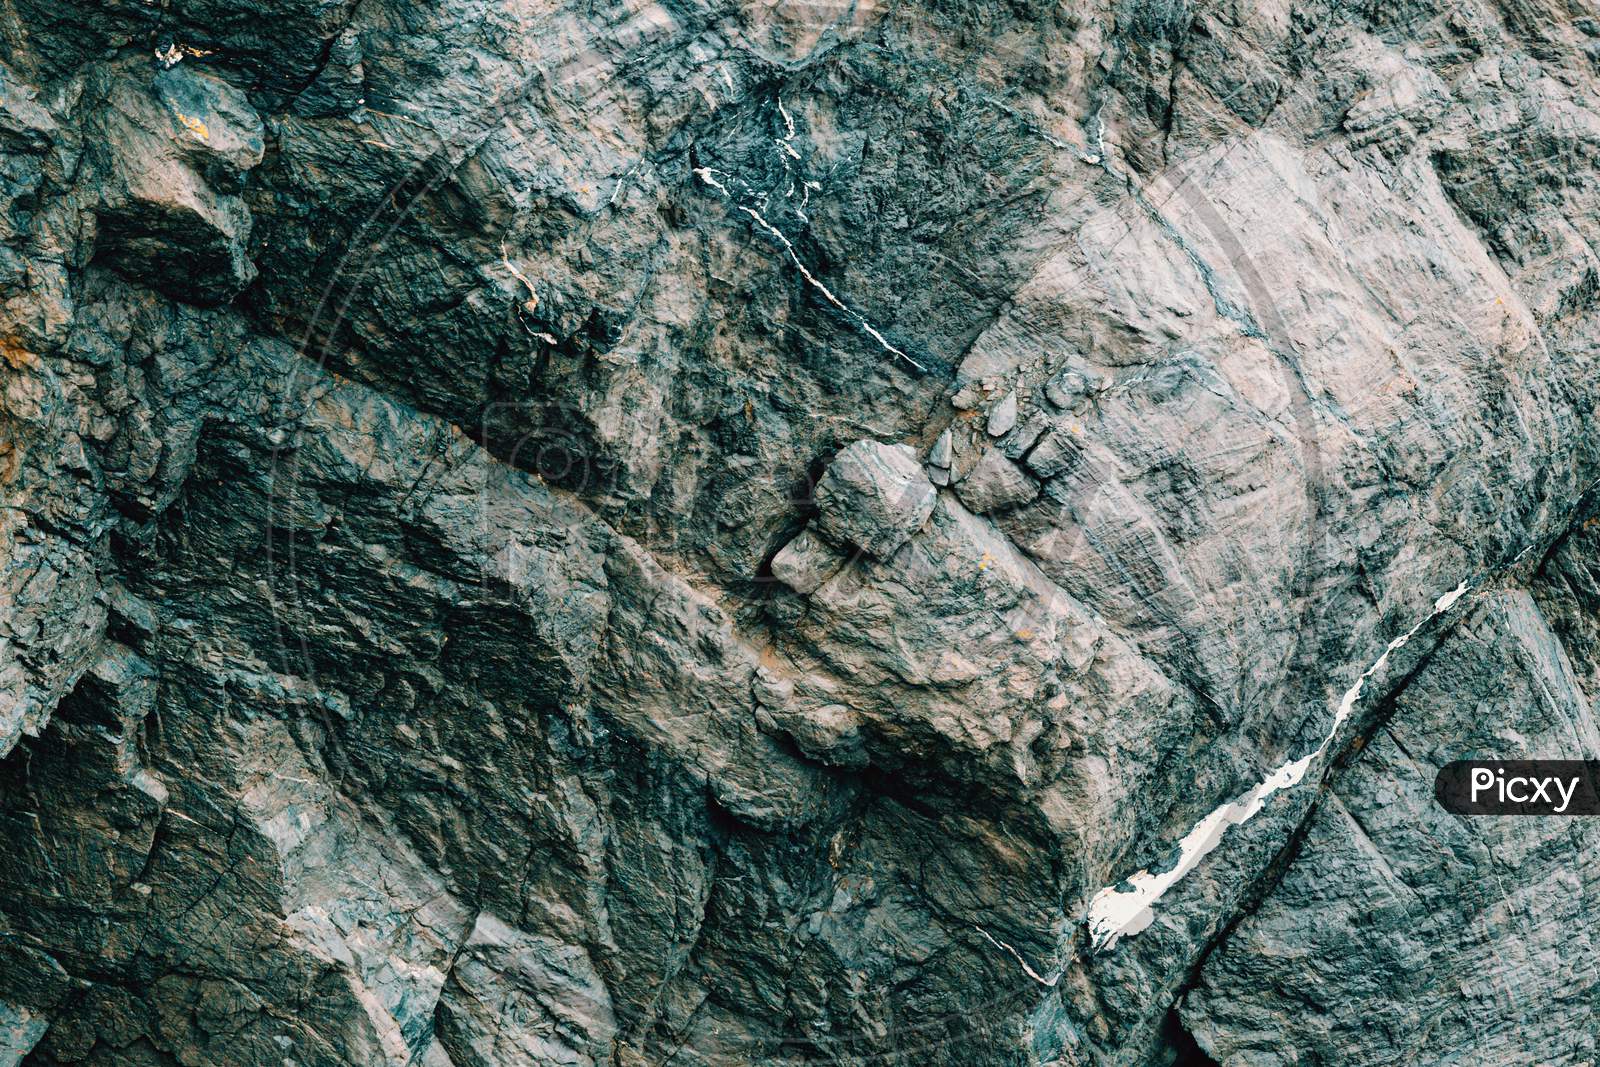 Flat Background Of A Grey Rock With Bluish Tones Over It